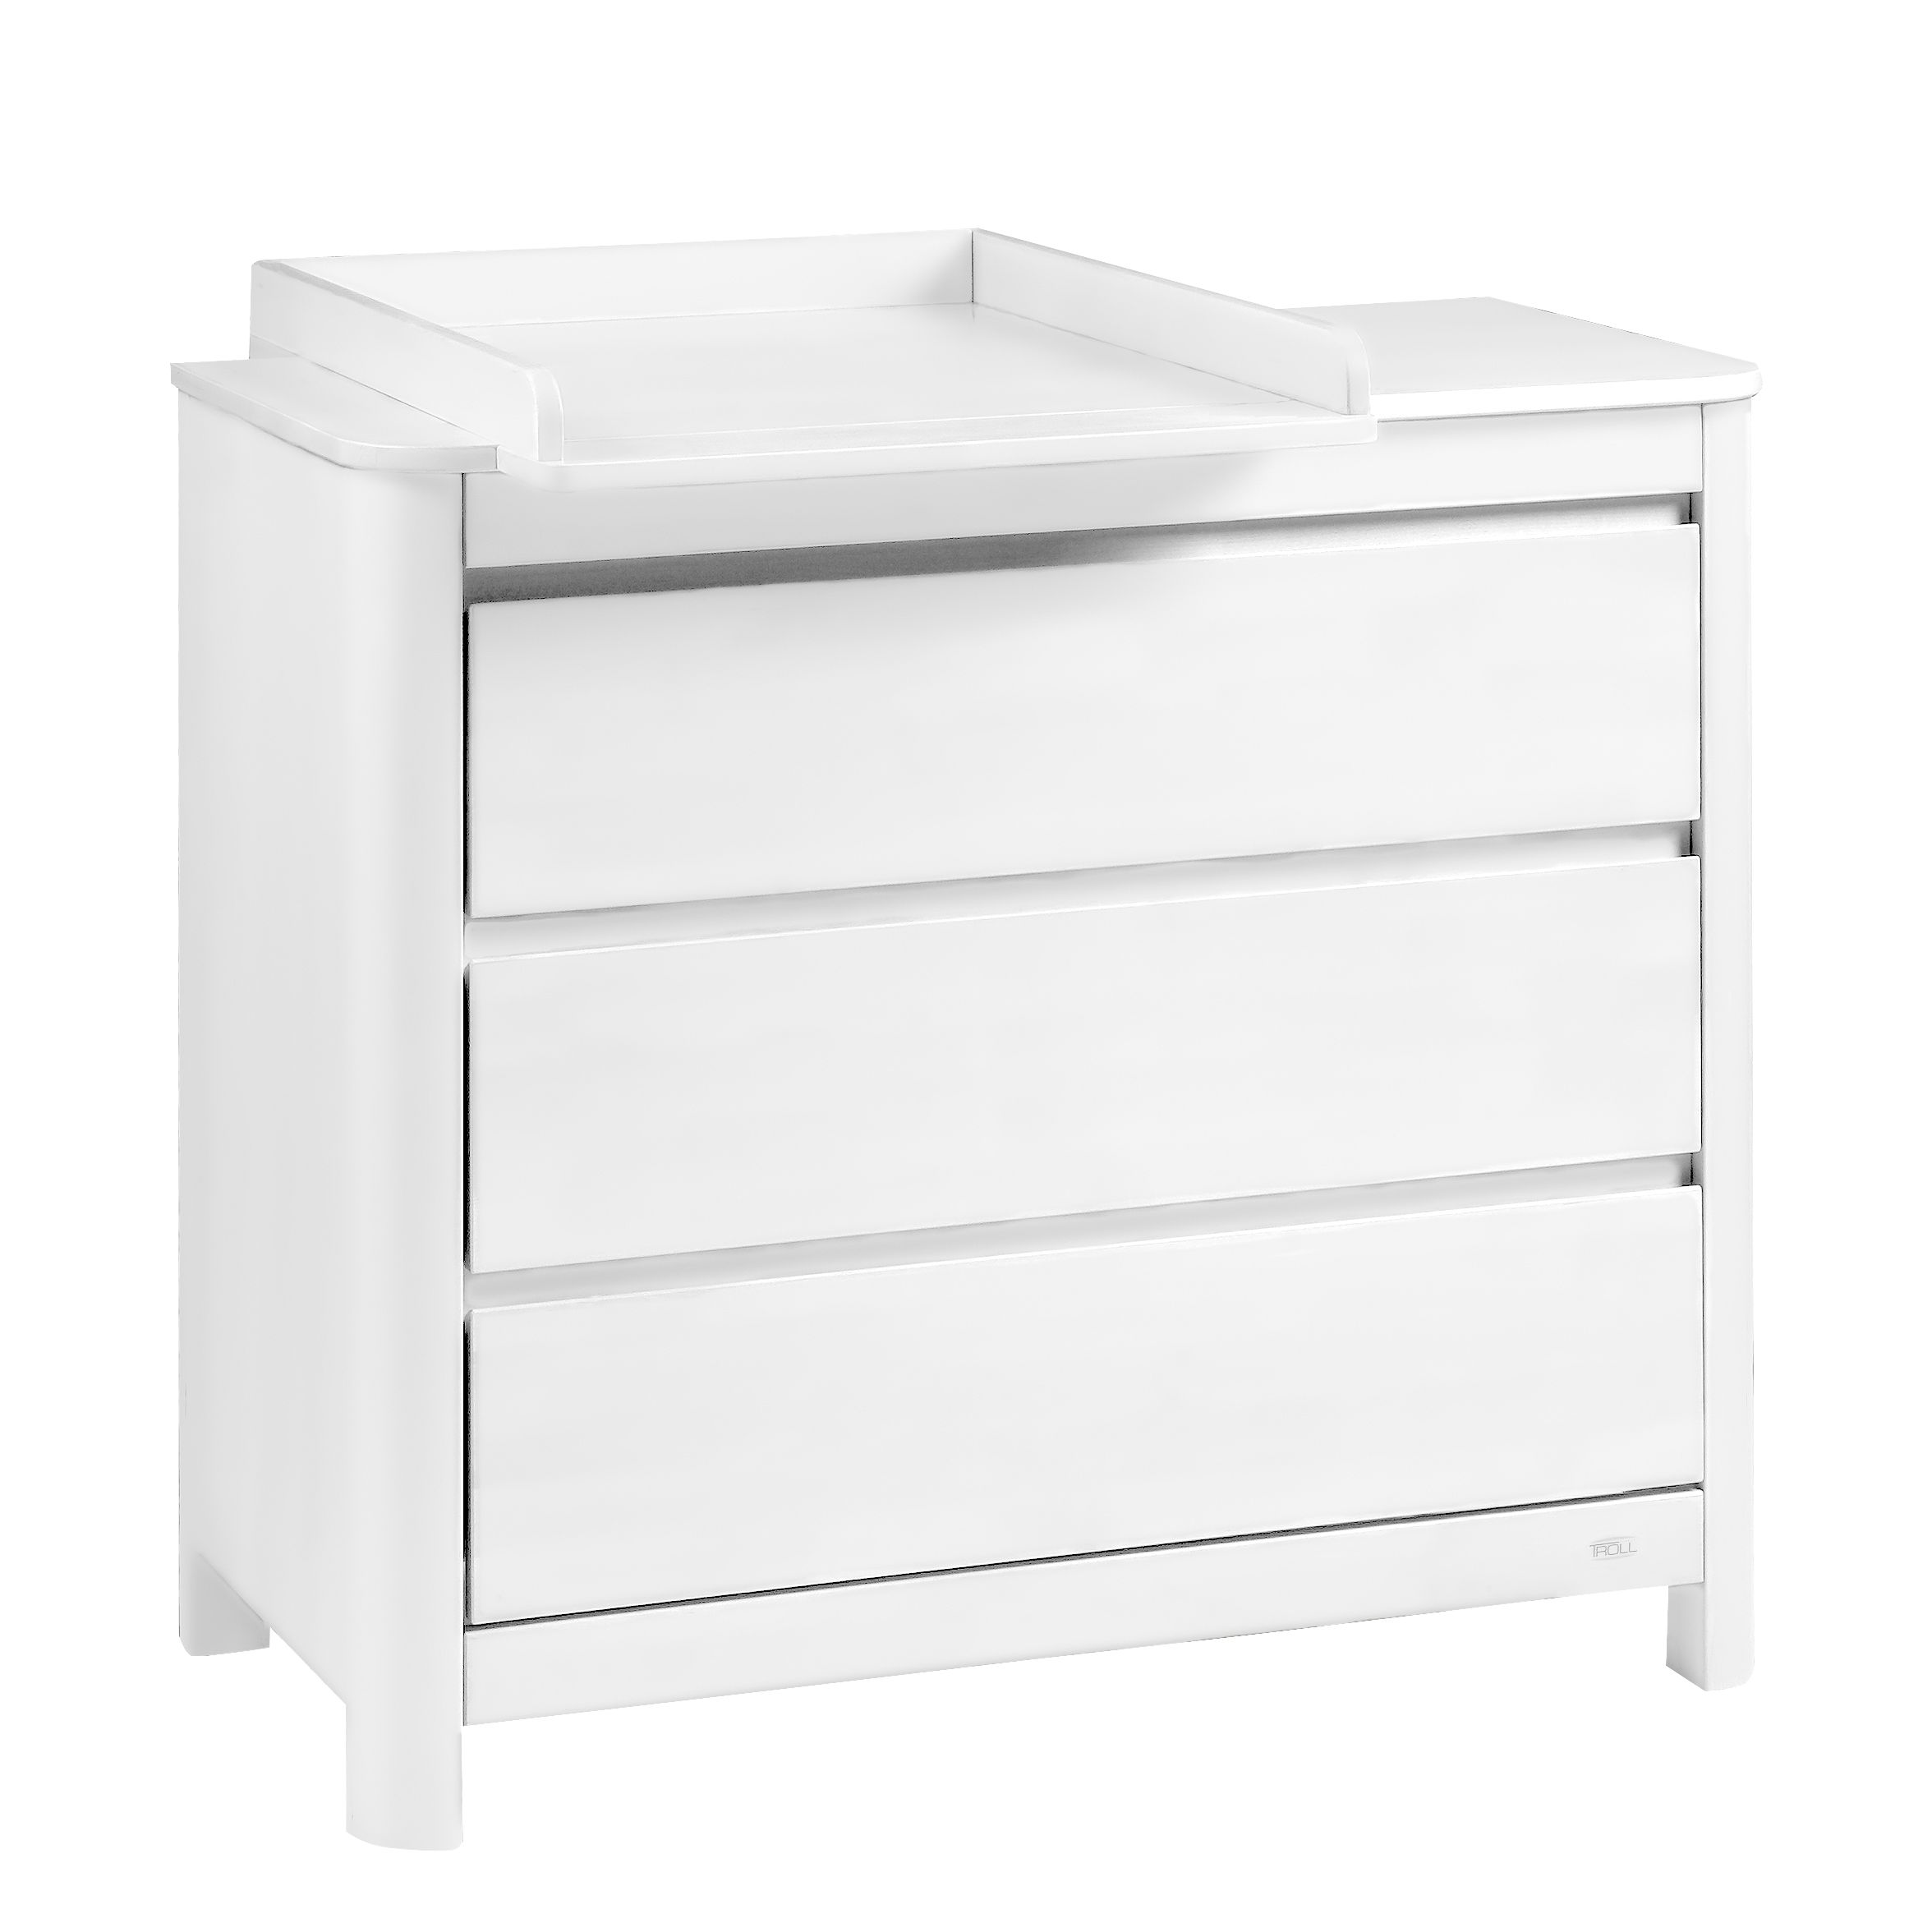 Troll Sun Chest of Drawers with Changing Extension, White at John Lewis